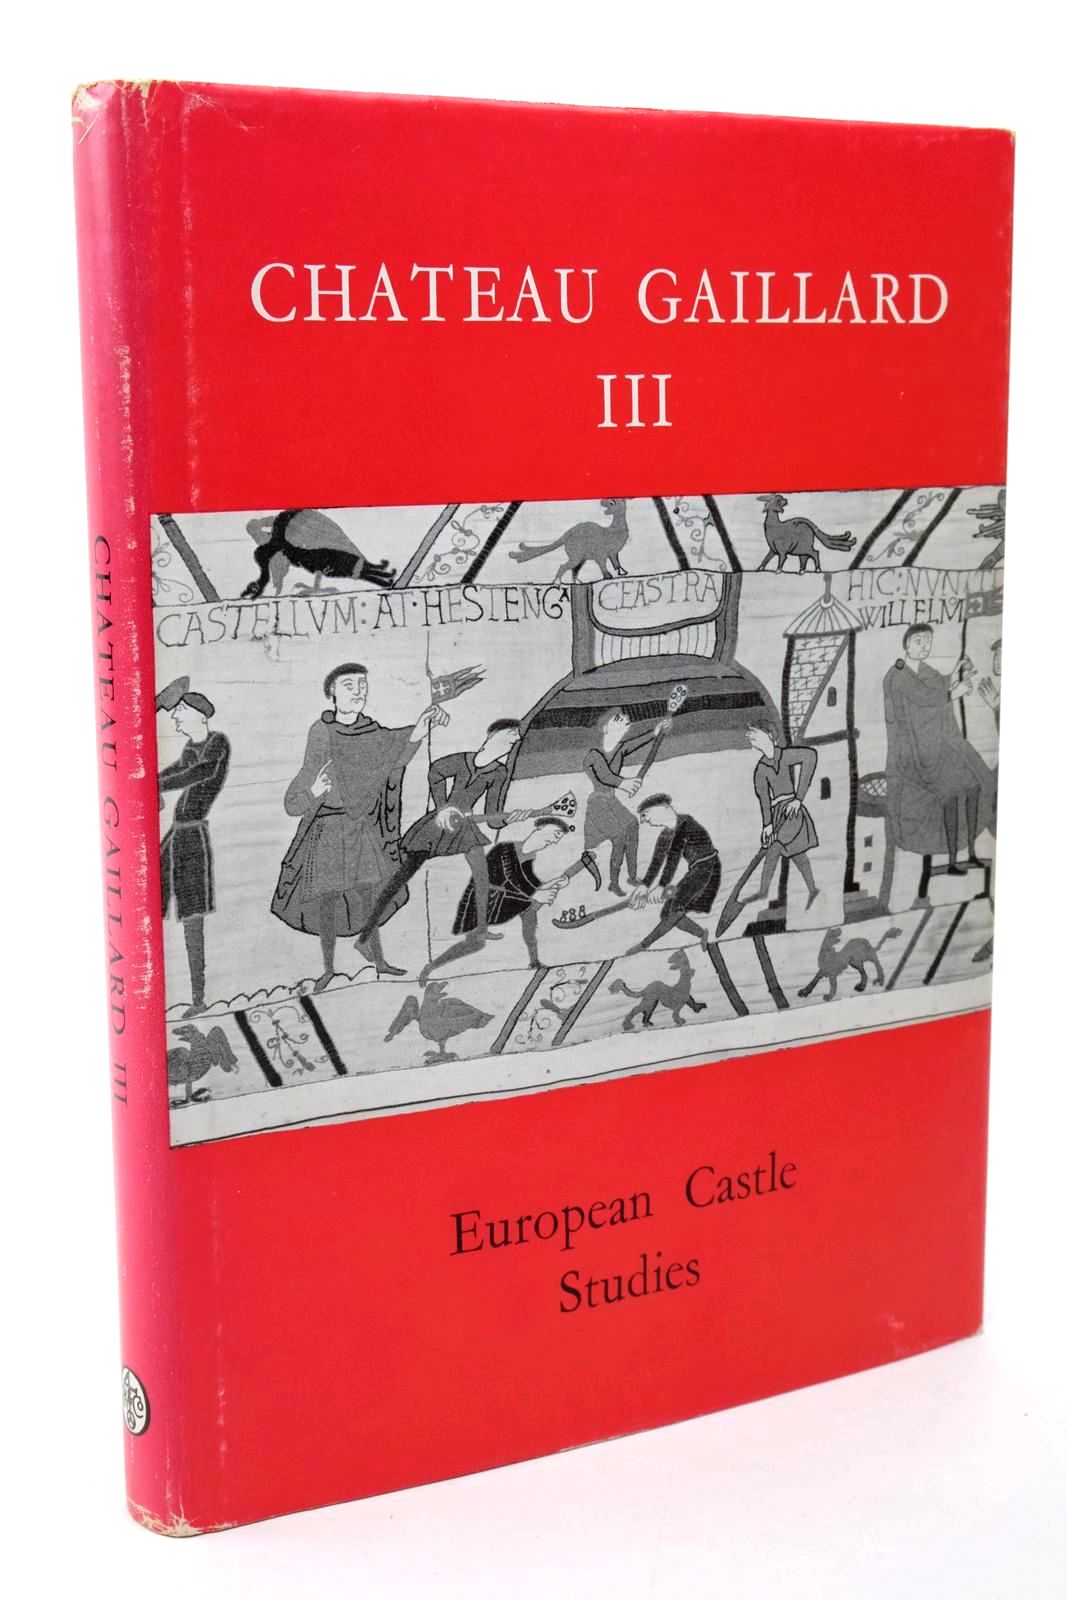 Photo of CHATEAU GAILLARD III - EUROPEAN CASTLE STUDIES written by Taylor, A.J. published by Phillimore &amp; Co. Ltd. (STOCK CODE: 1322586)  for sale by Stella & Rose's Books